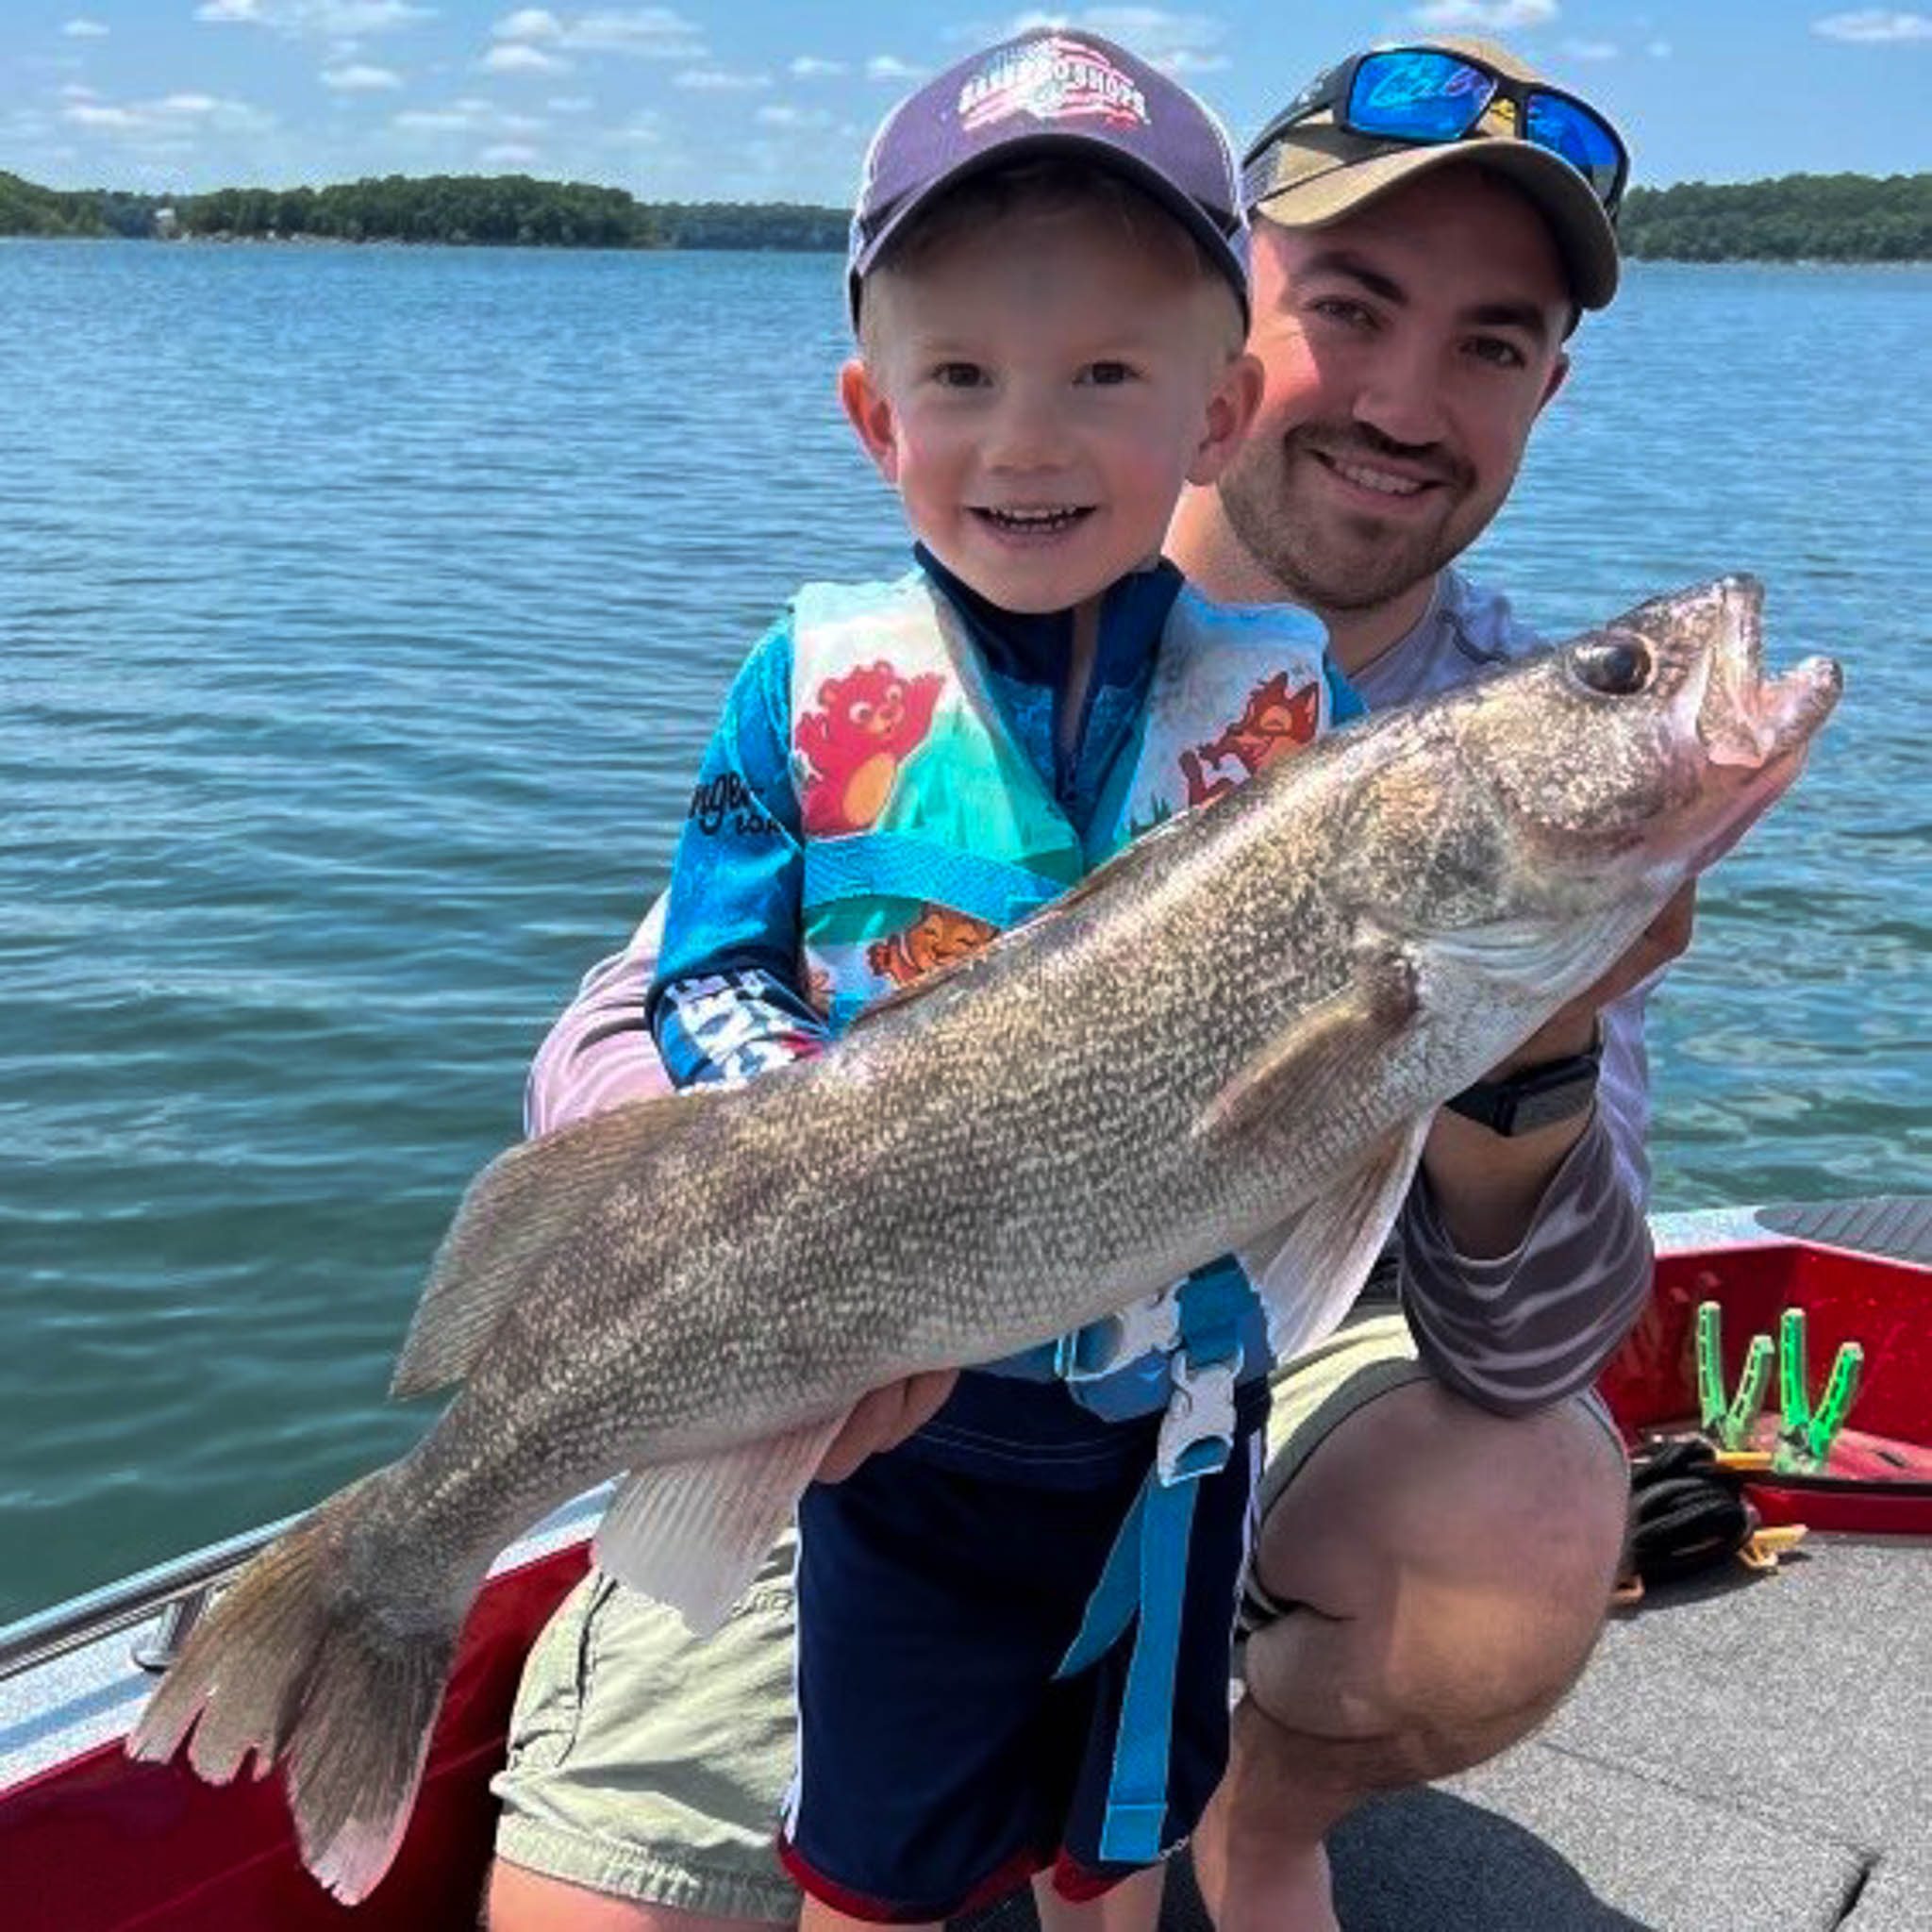 Father and son catch a big fish